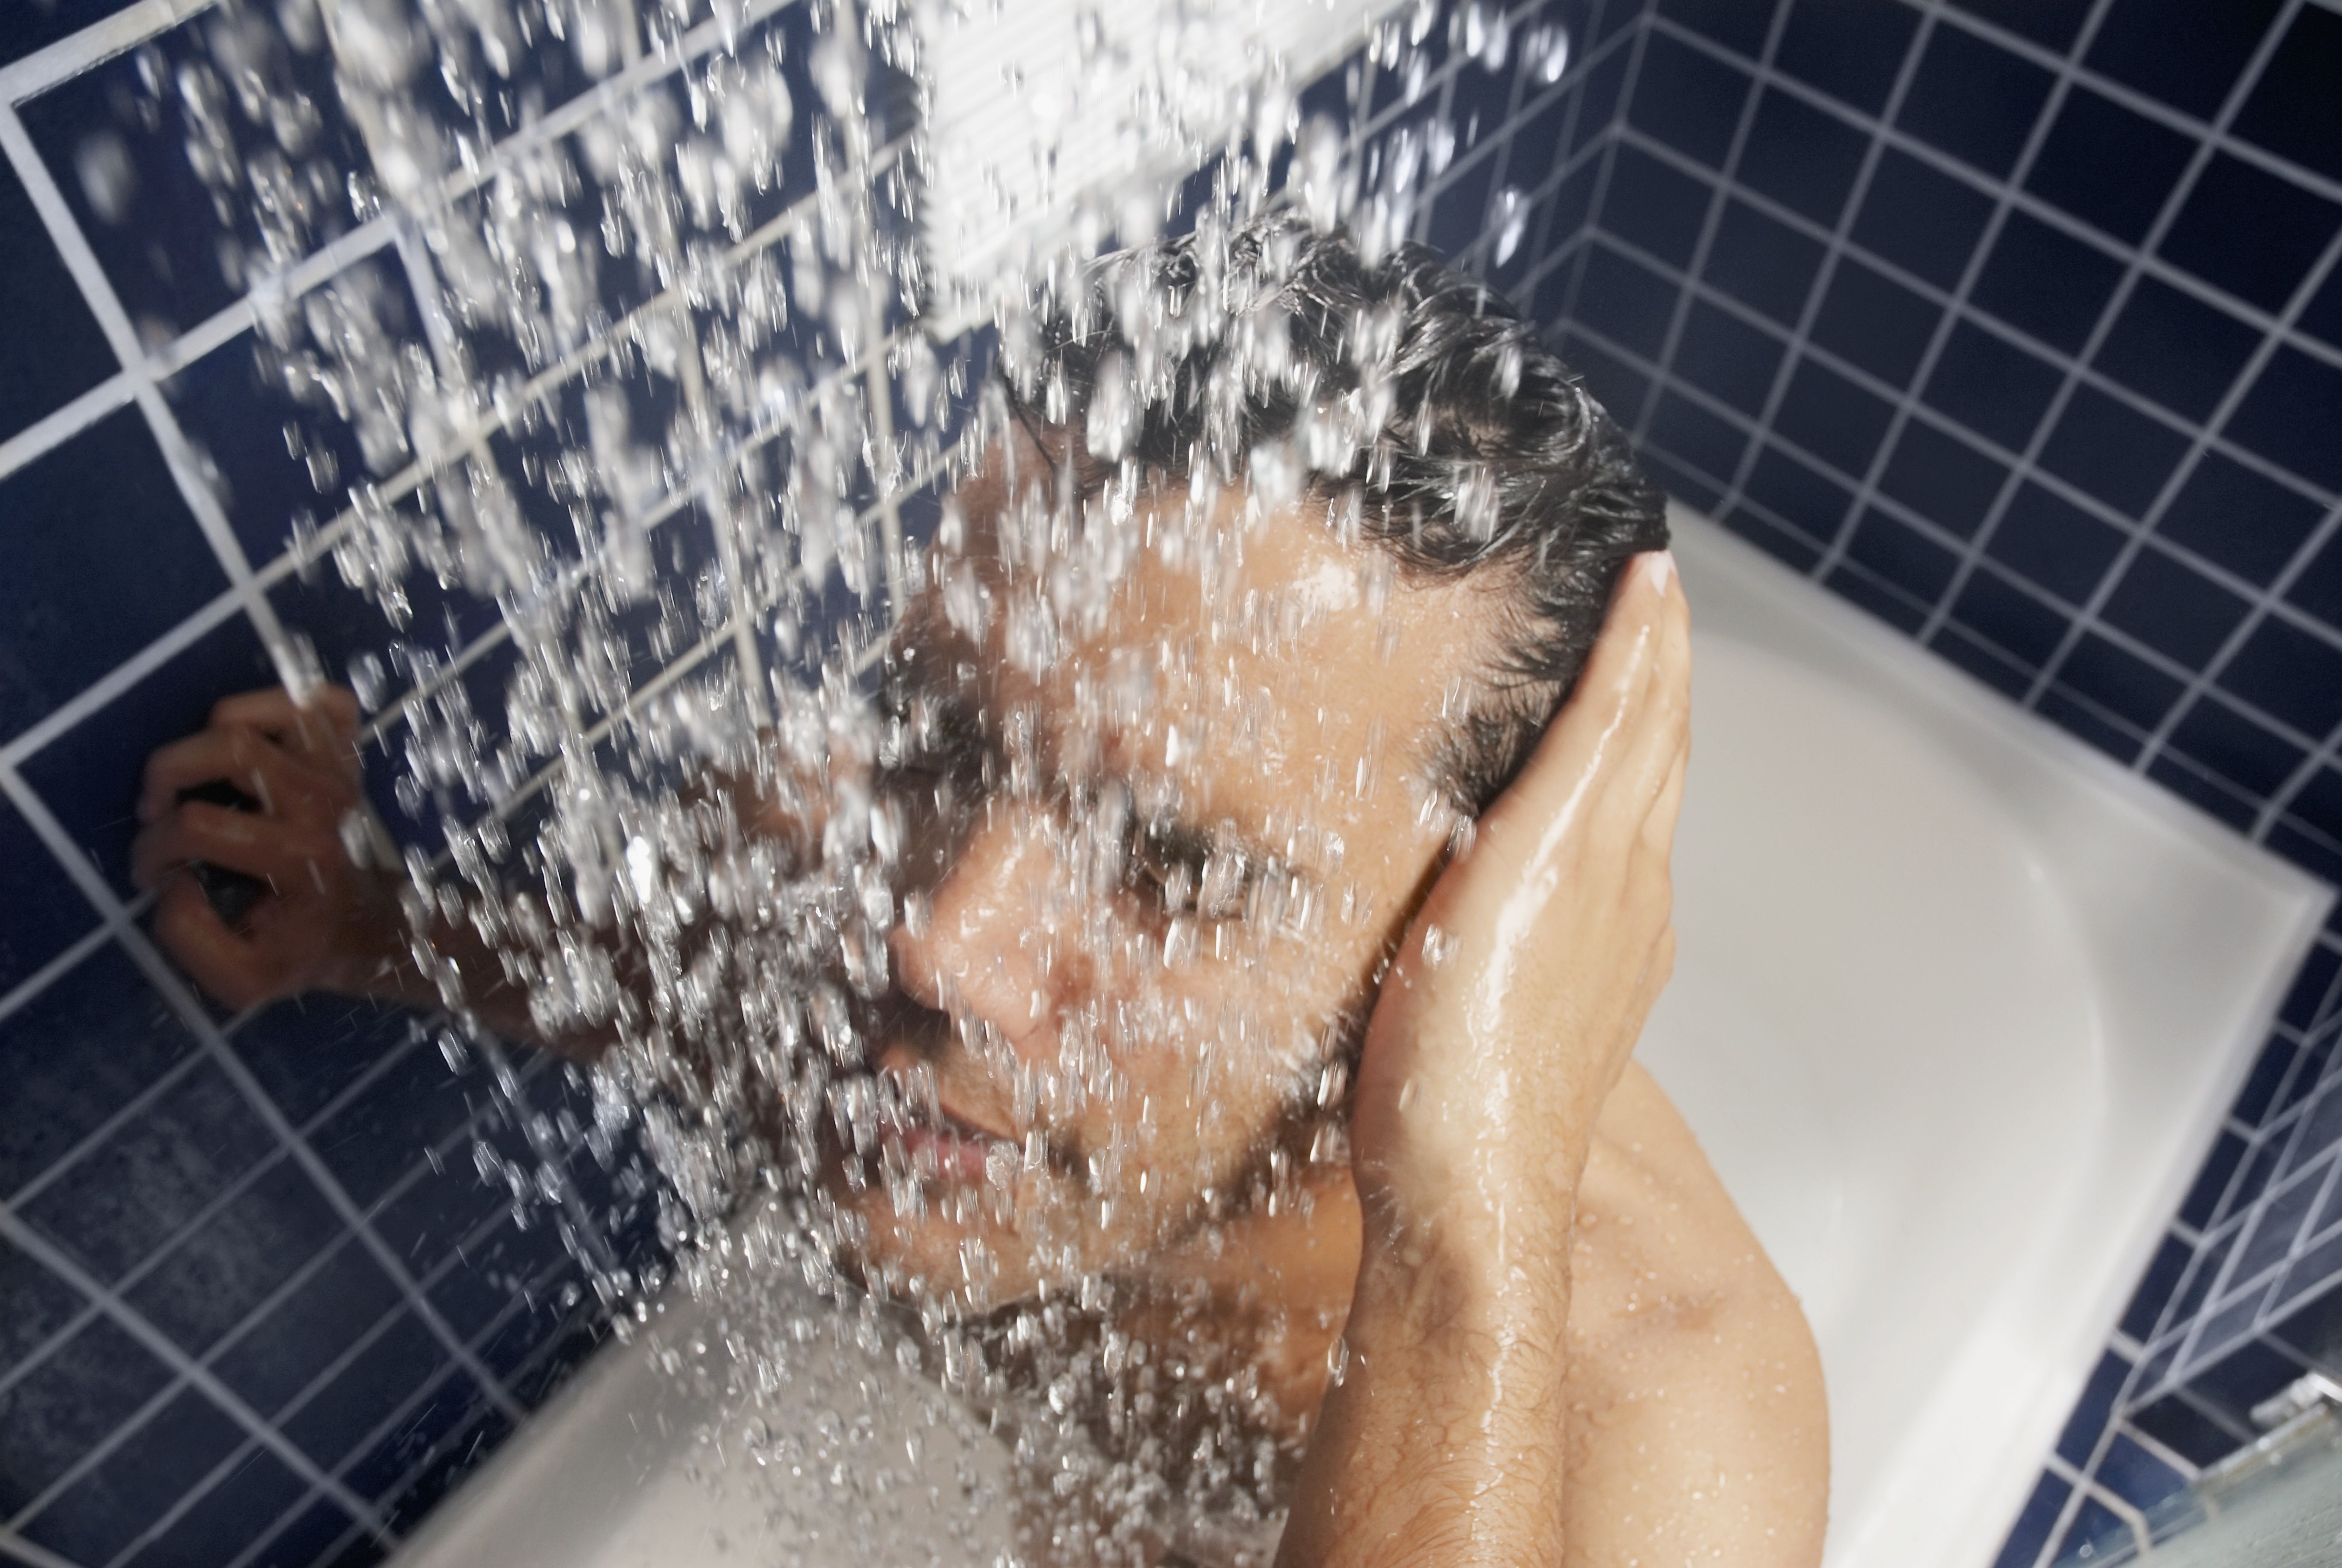 Cold Showers Benefits: Health Benefits and The Best Way to do Them